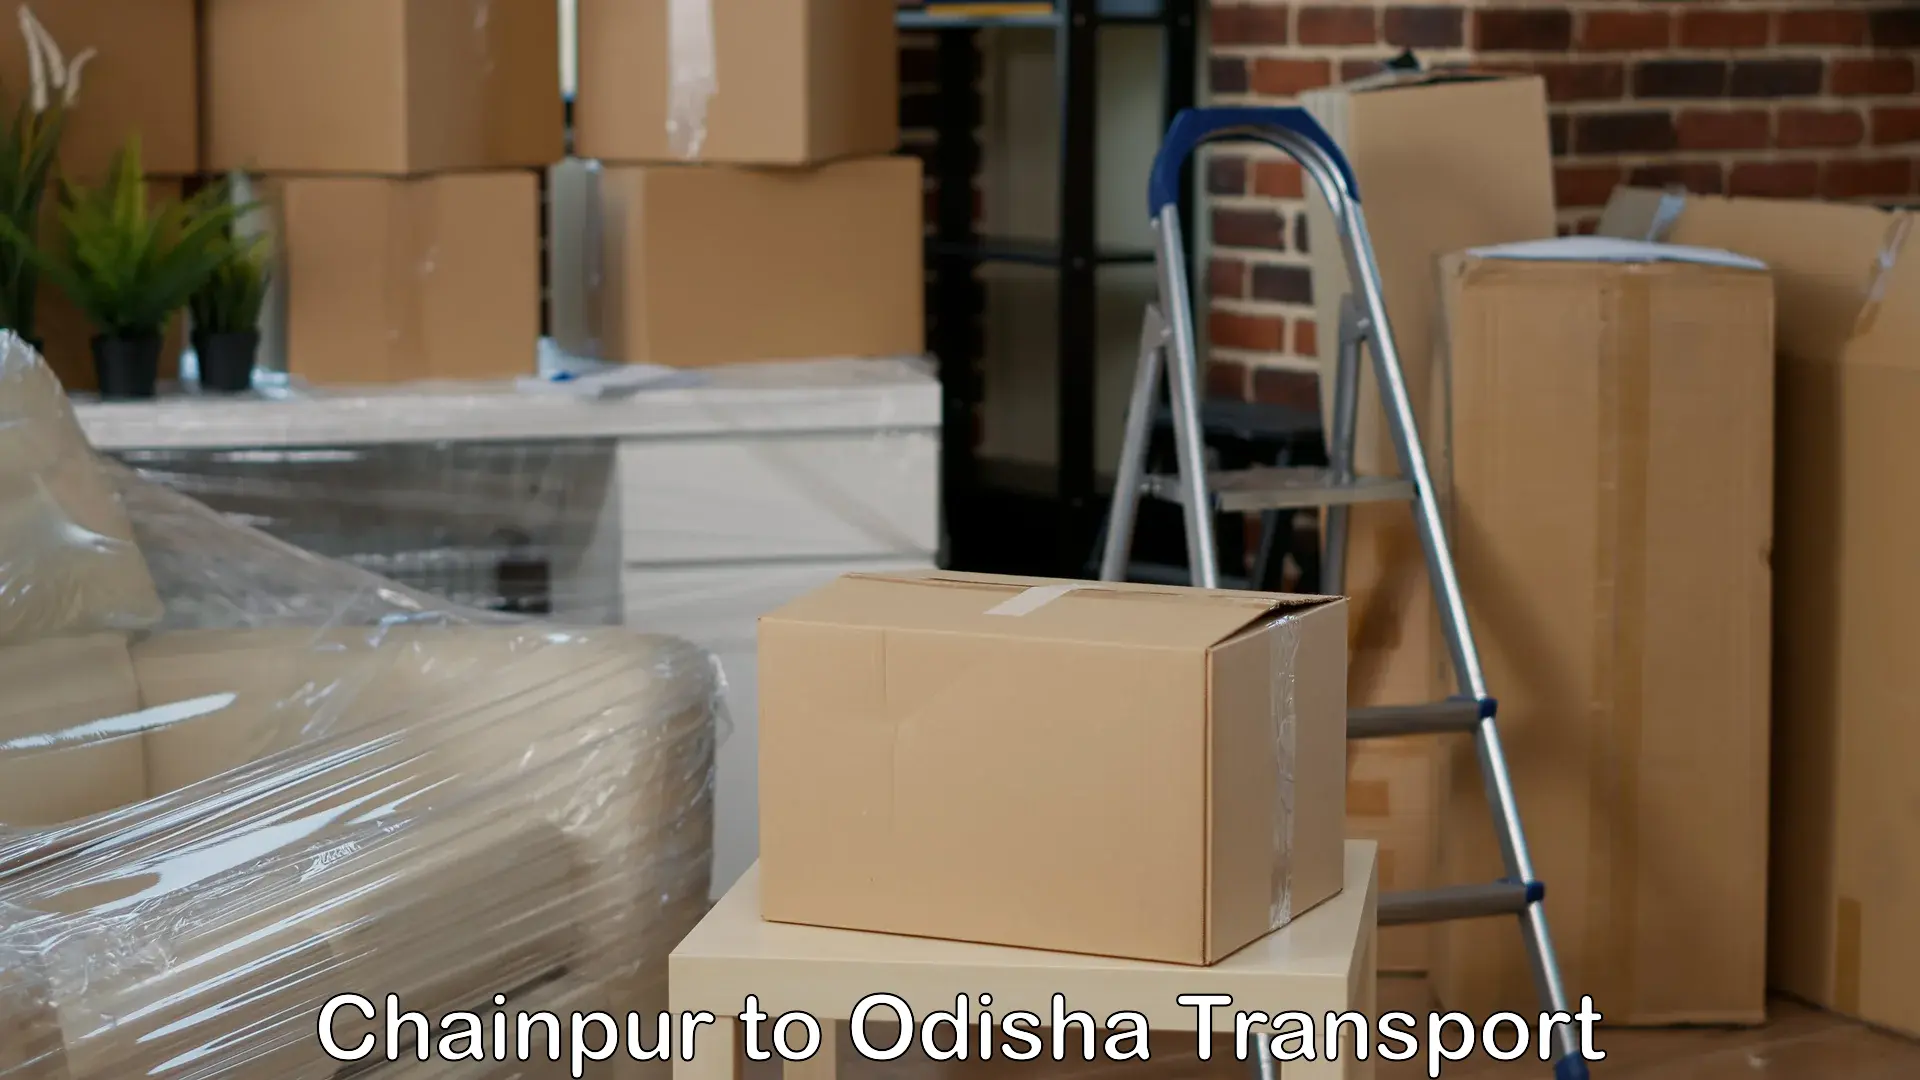 Lorry transport service Chainpur to Mohana